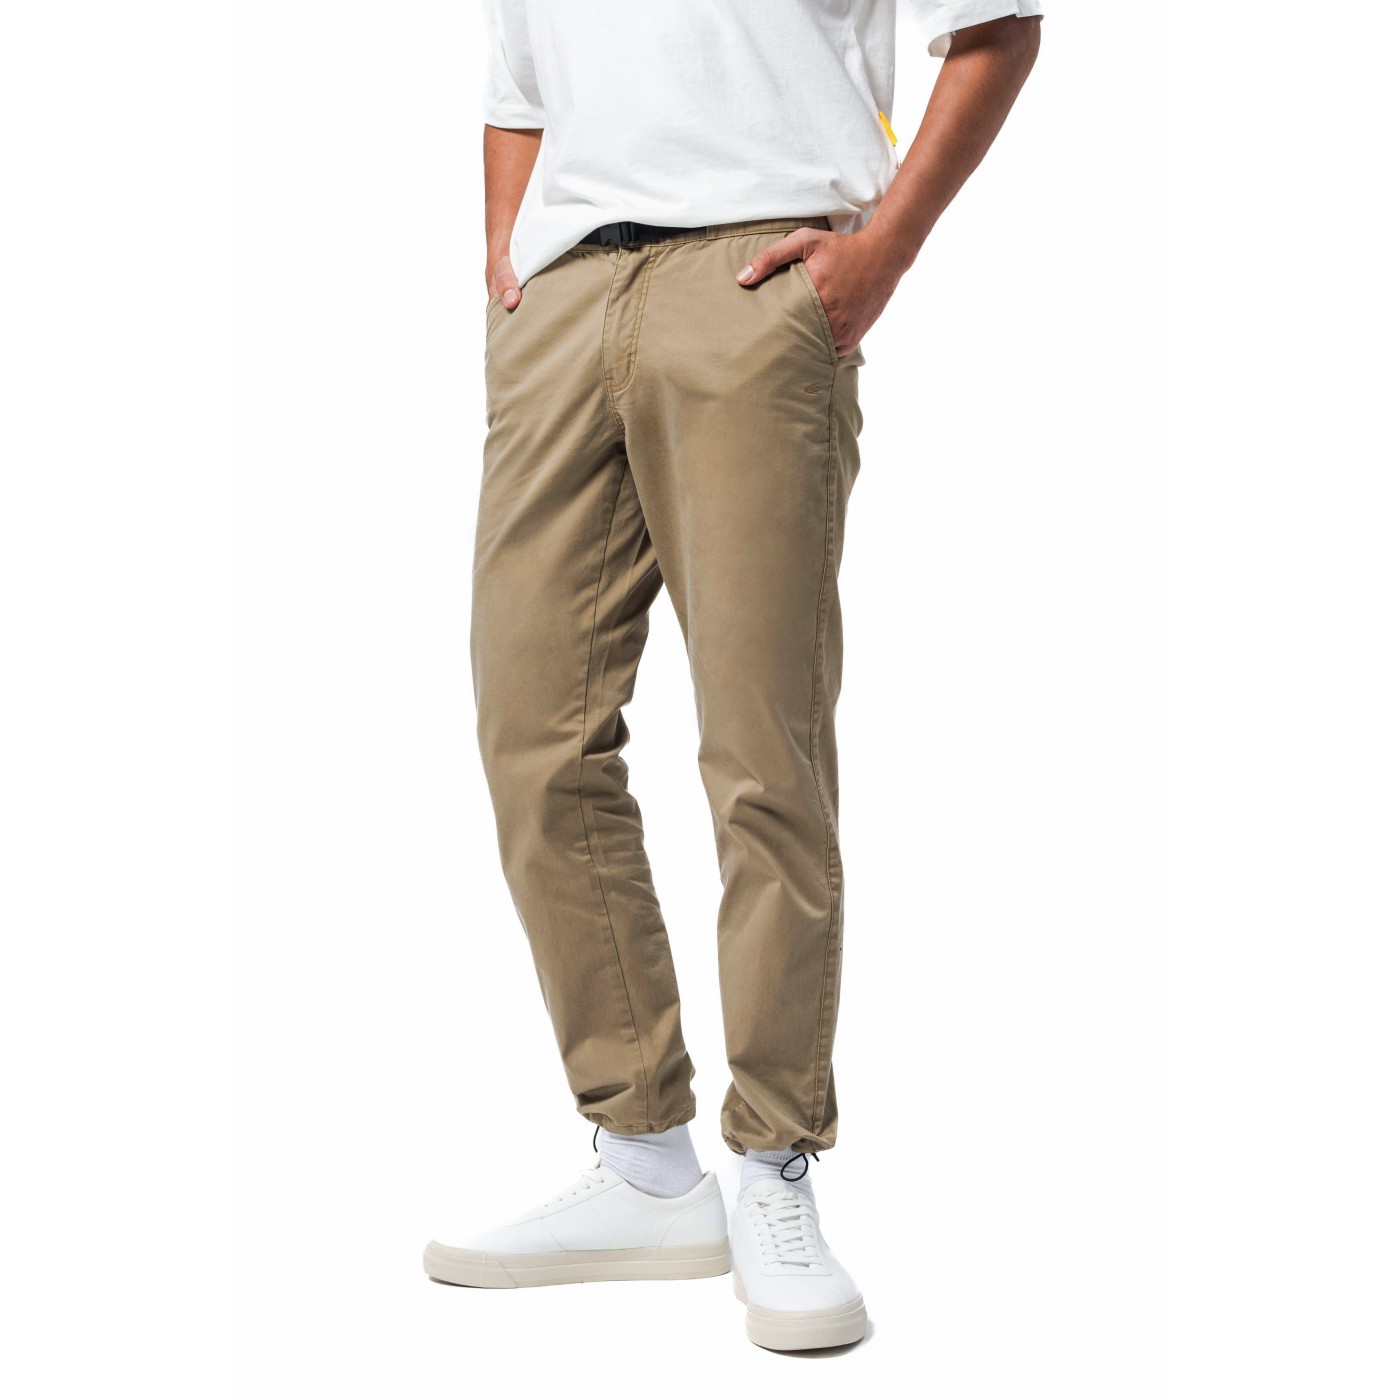 Buy Travel100 Travel TrousersCamel Online  Comfortable and Multi pocket  Trouser by Forclaz